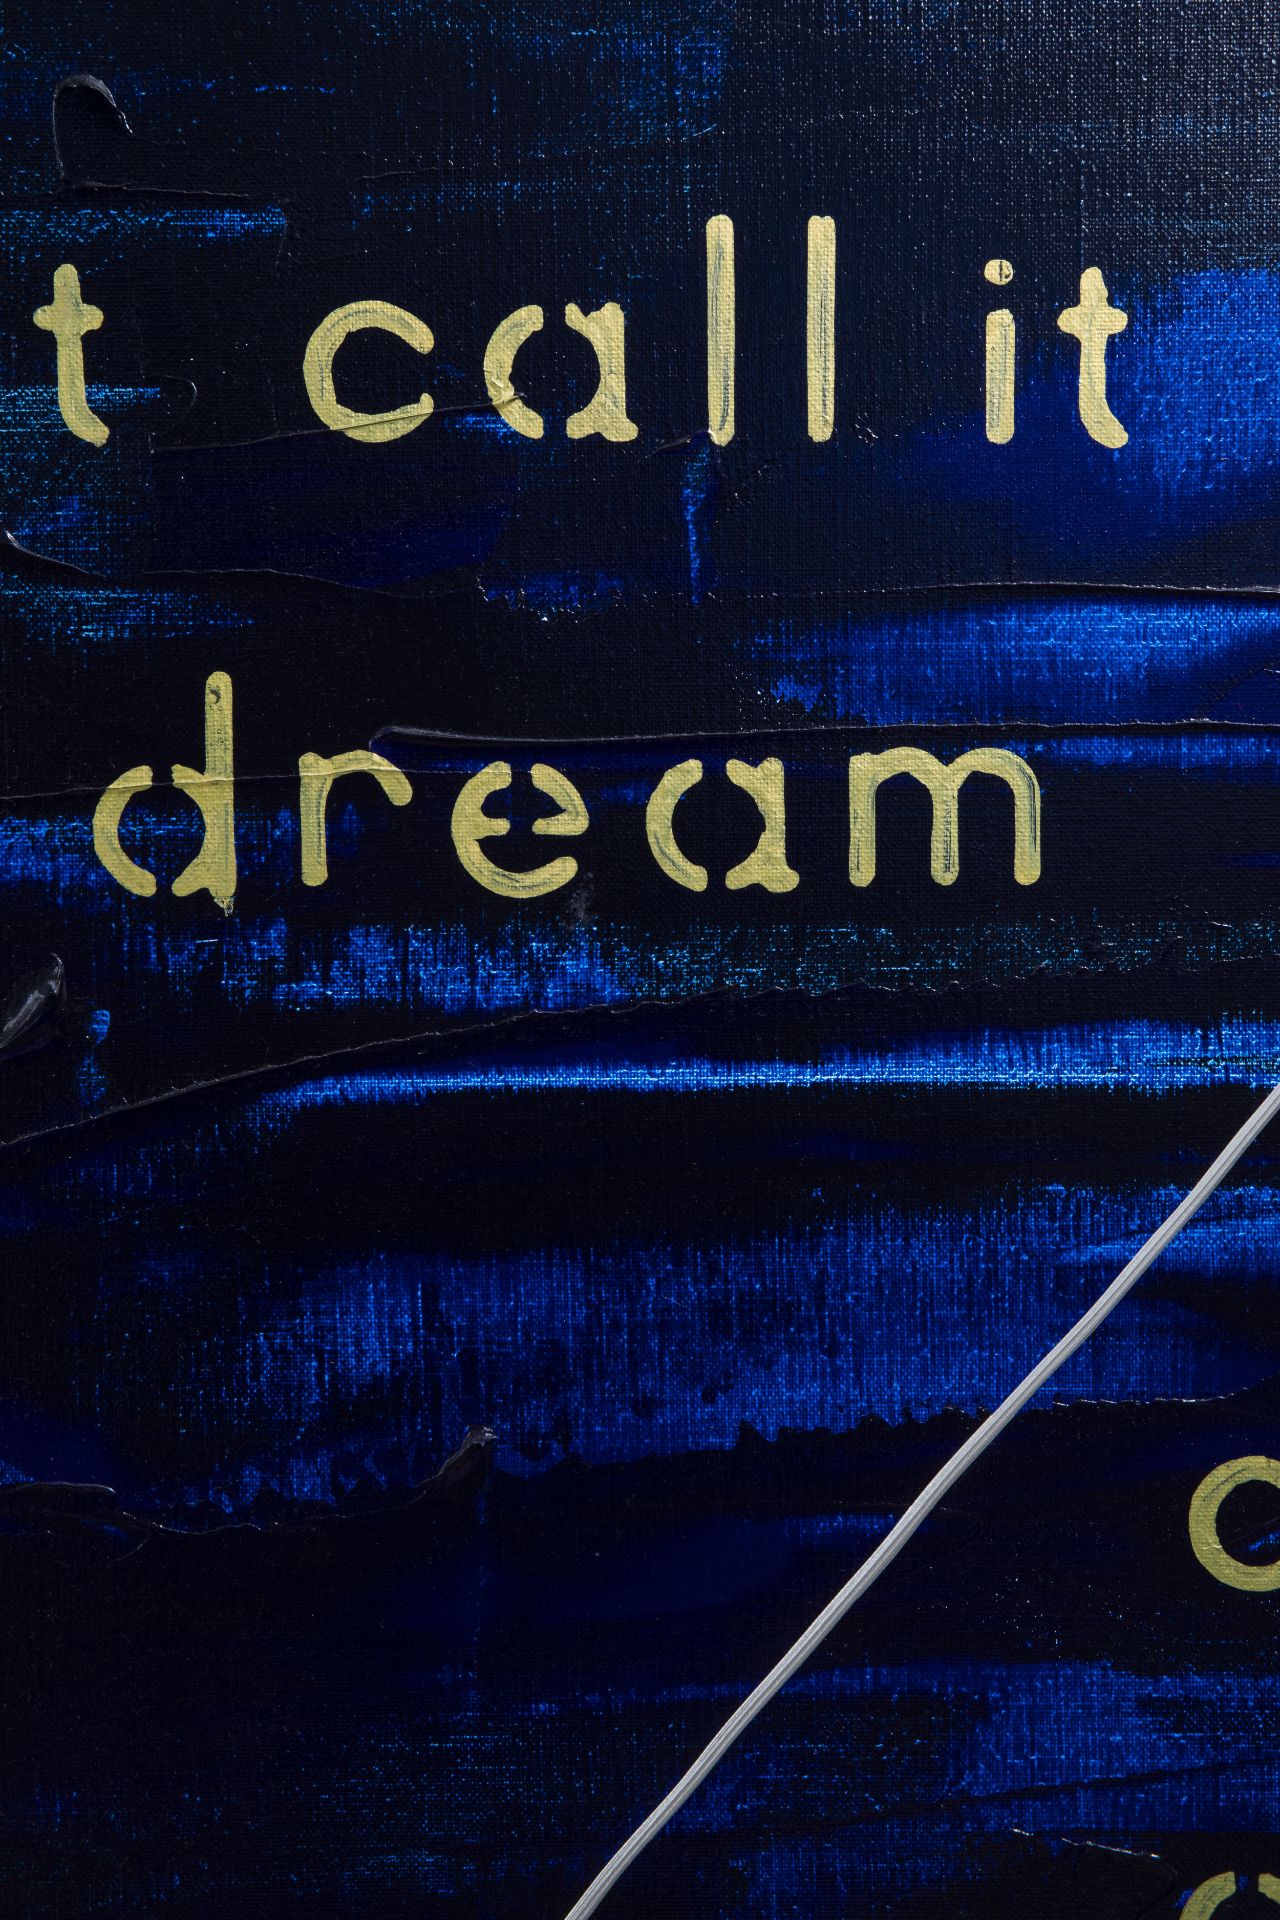 Philippe Bussa (1954): 'Don't call it a dream, call it a plan', oil on canvas - Image 5 of 6